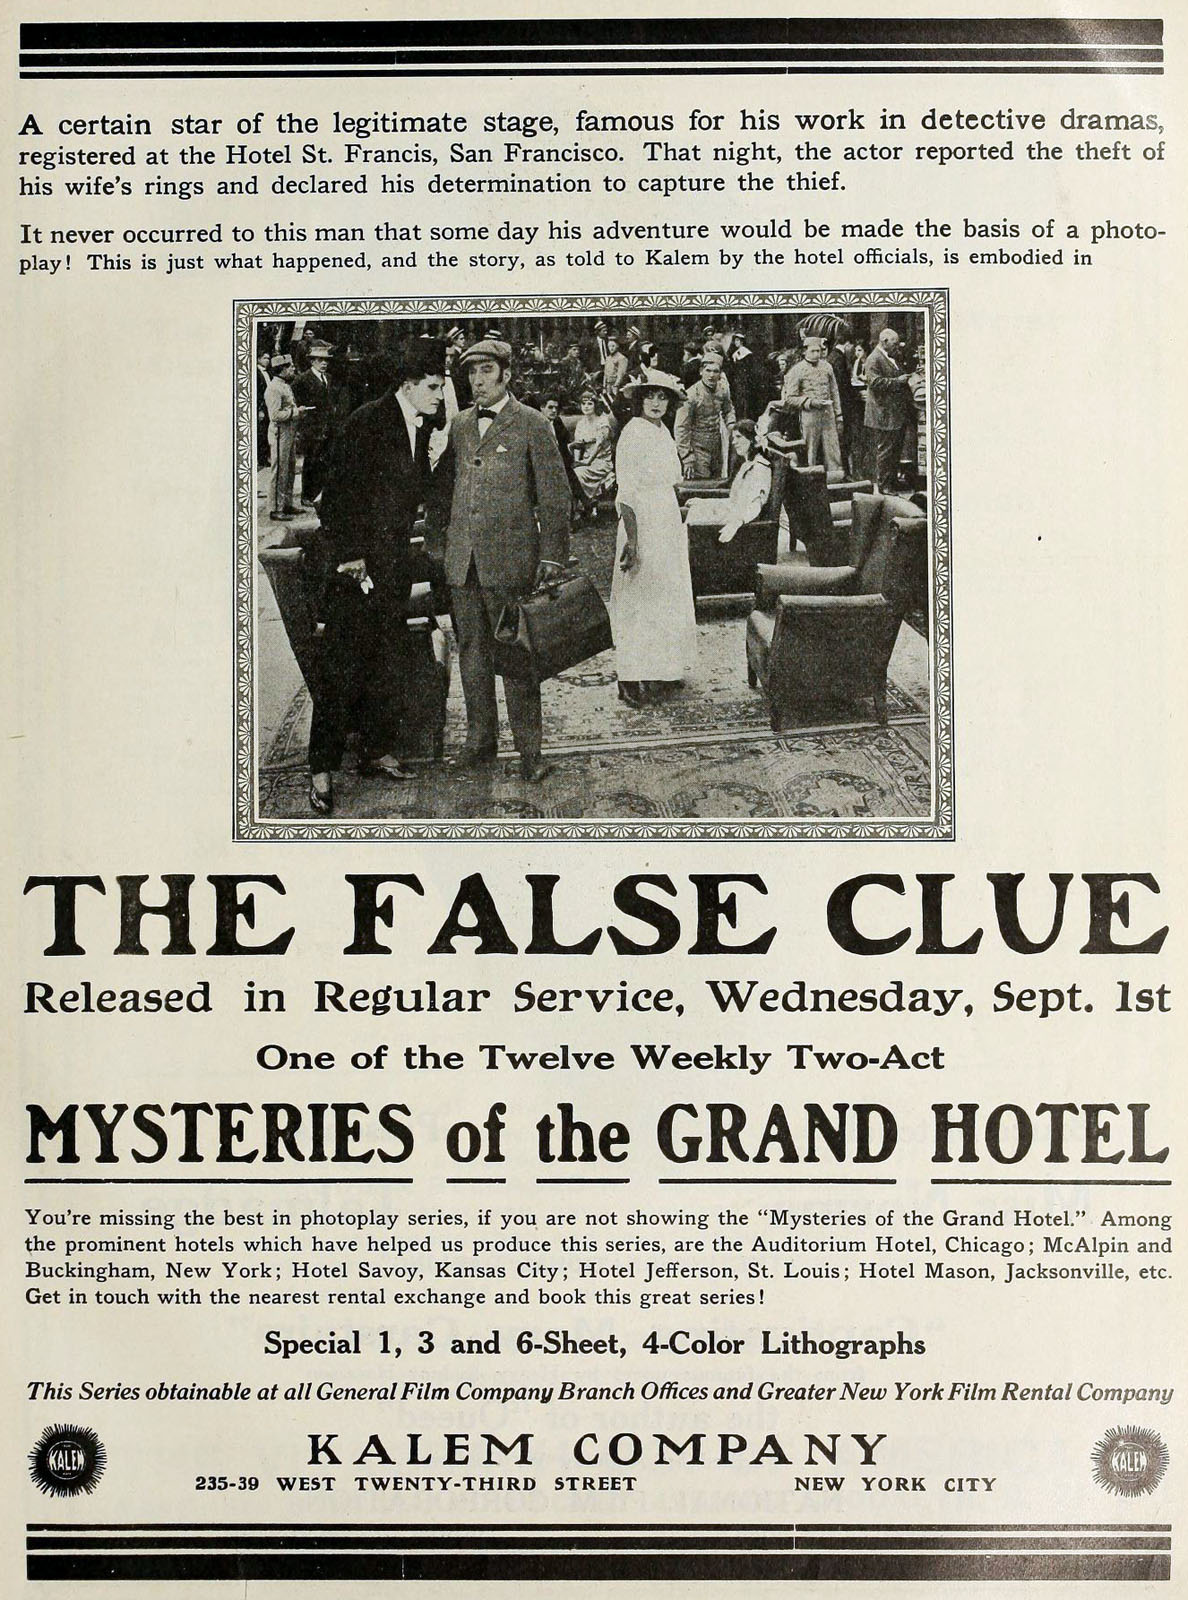 Mysteries of the Grand Hotel #7 The False Clue